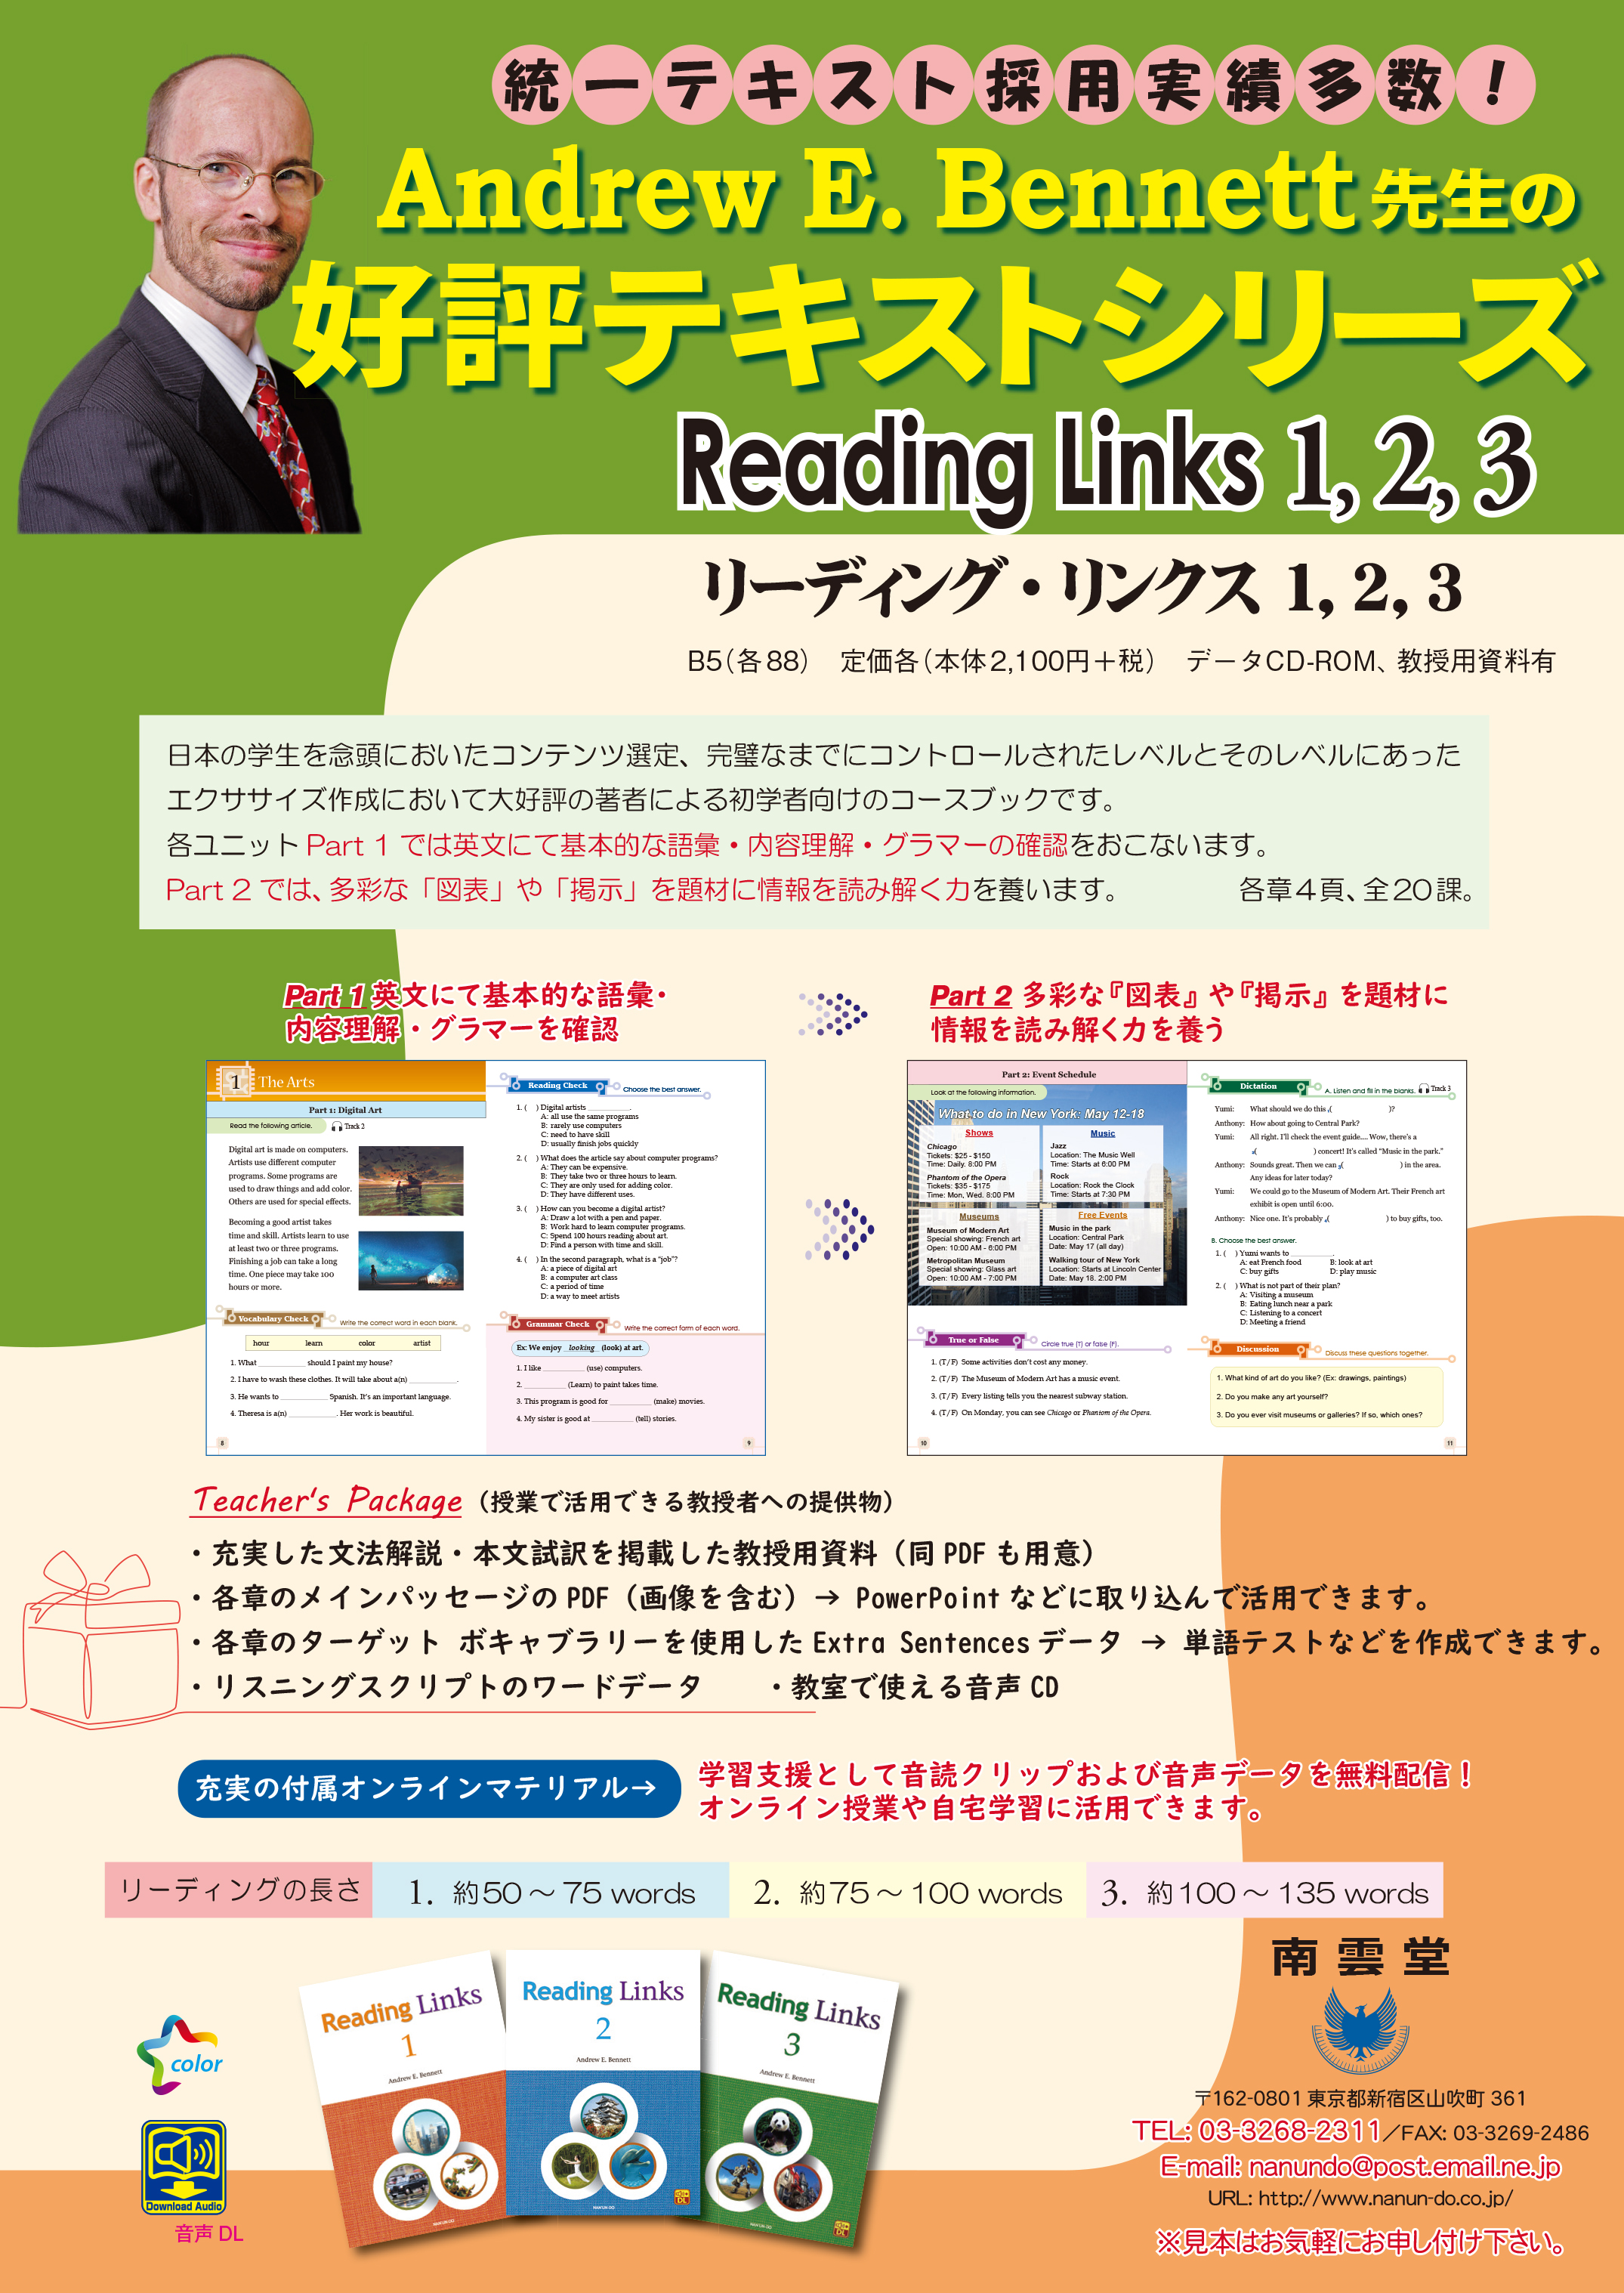 Reading Links 1, 2, and 3 好評シリーズのご案内